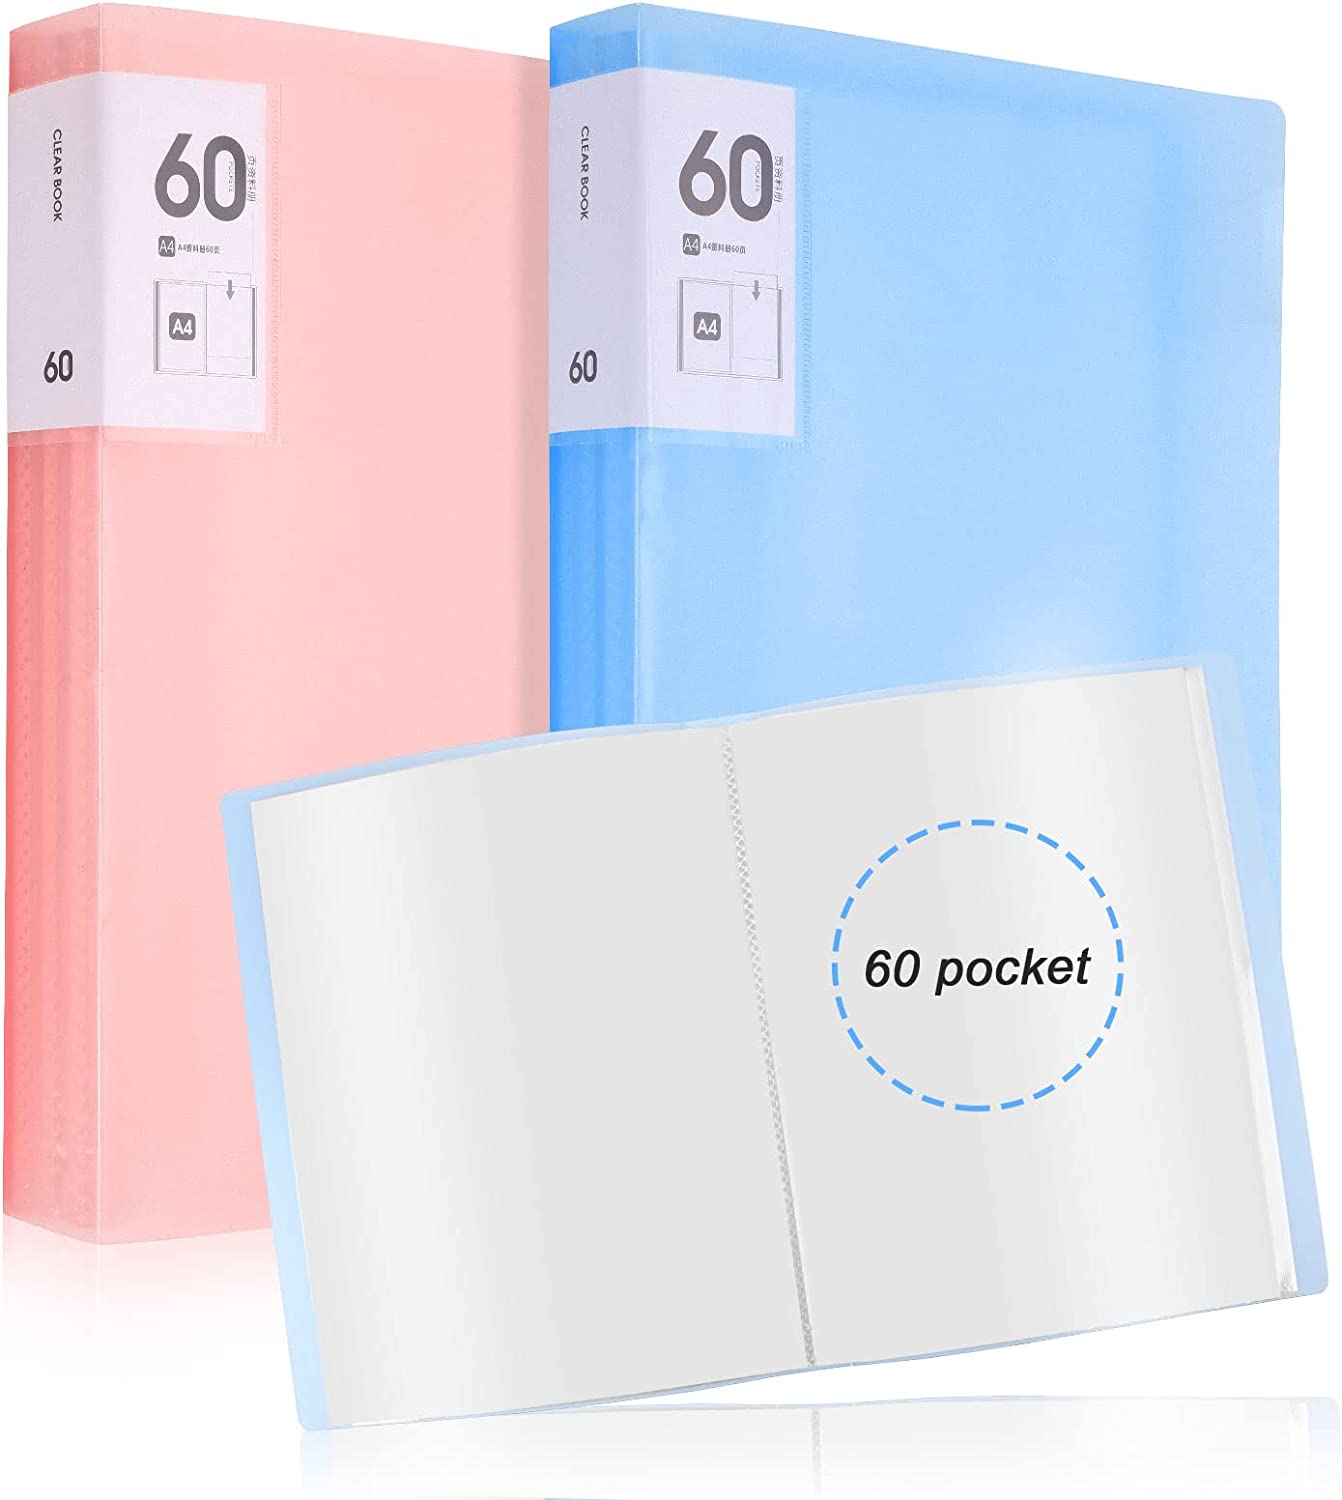 KissDate 60 Pocket Presentation Book with Clear Sleeves 2 Pcs